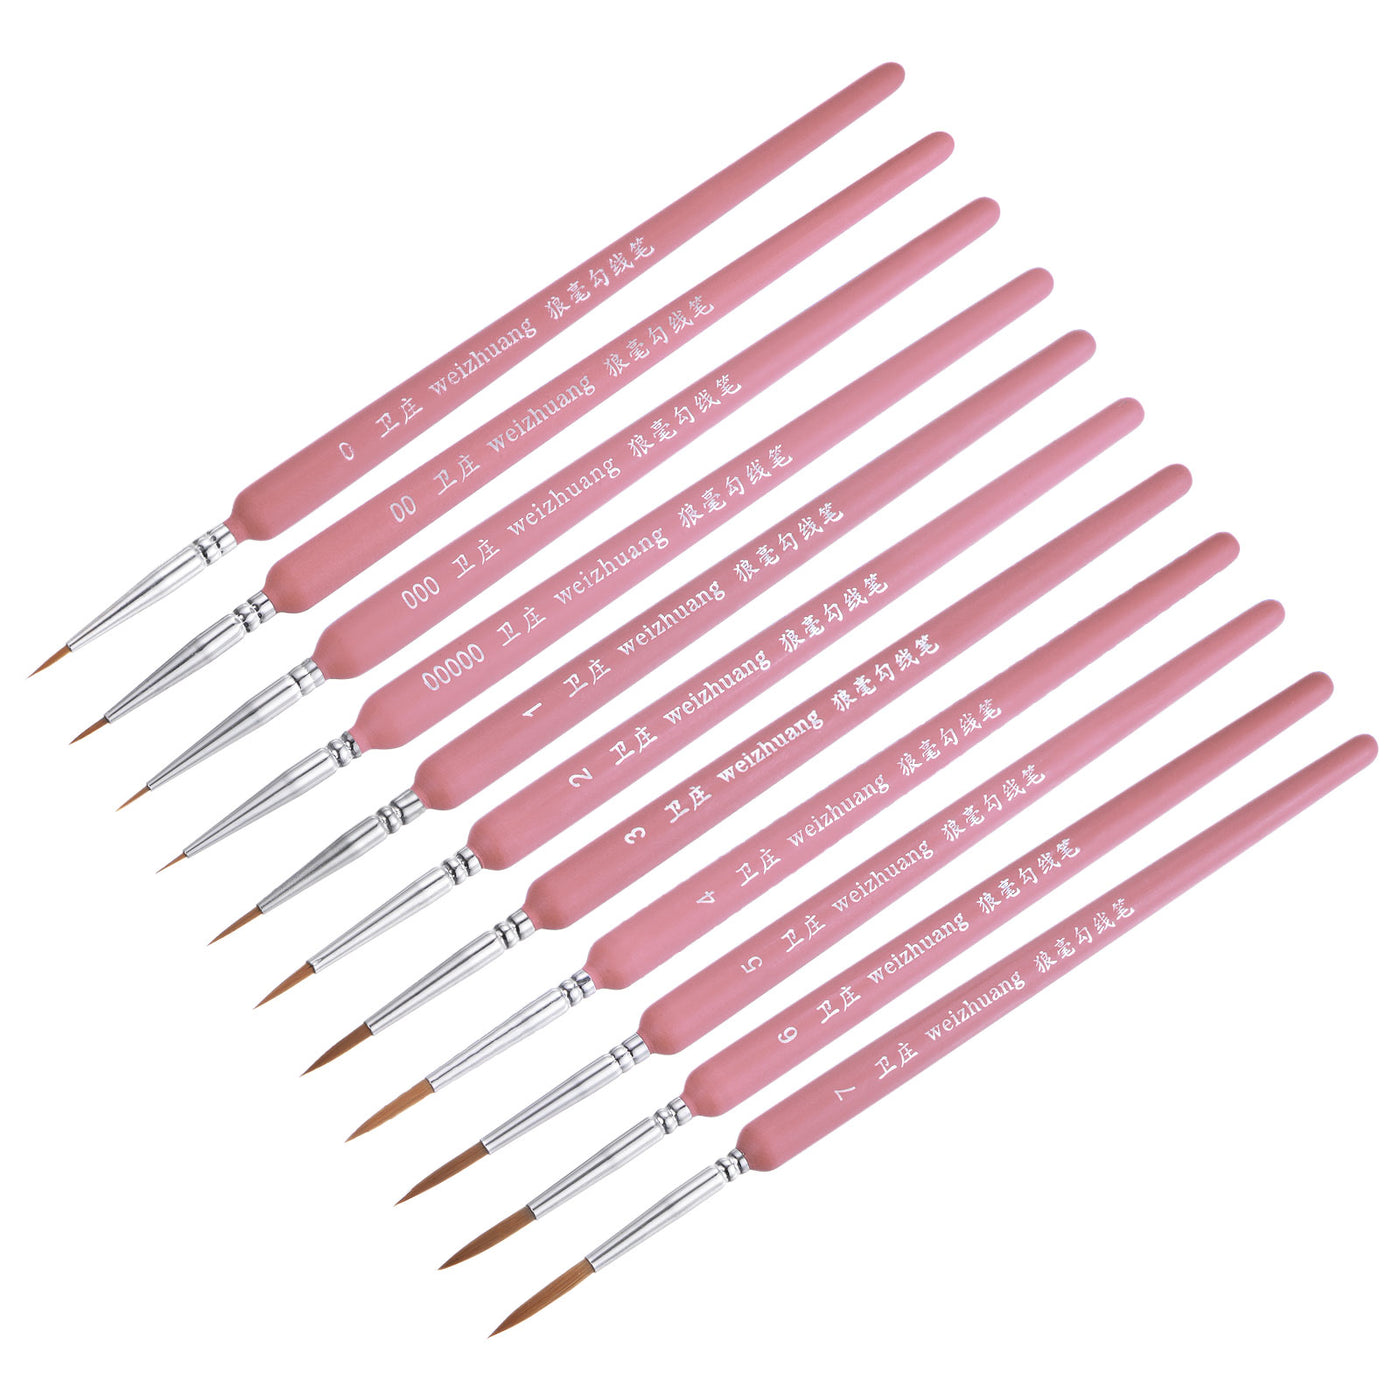 uxcell Uxcell Detailing Paint Brush Set Pointed Bristle Pink Wood Handle 1 Set (11Pcs)